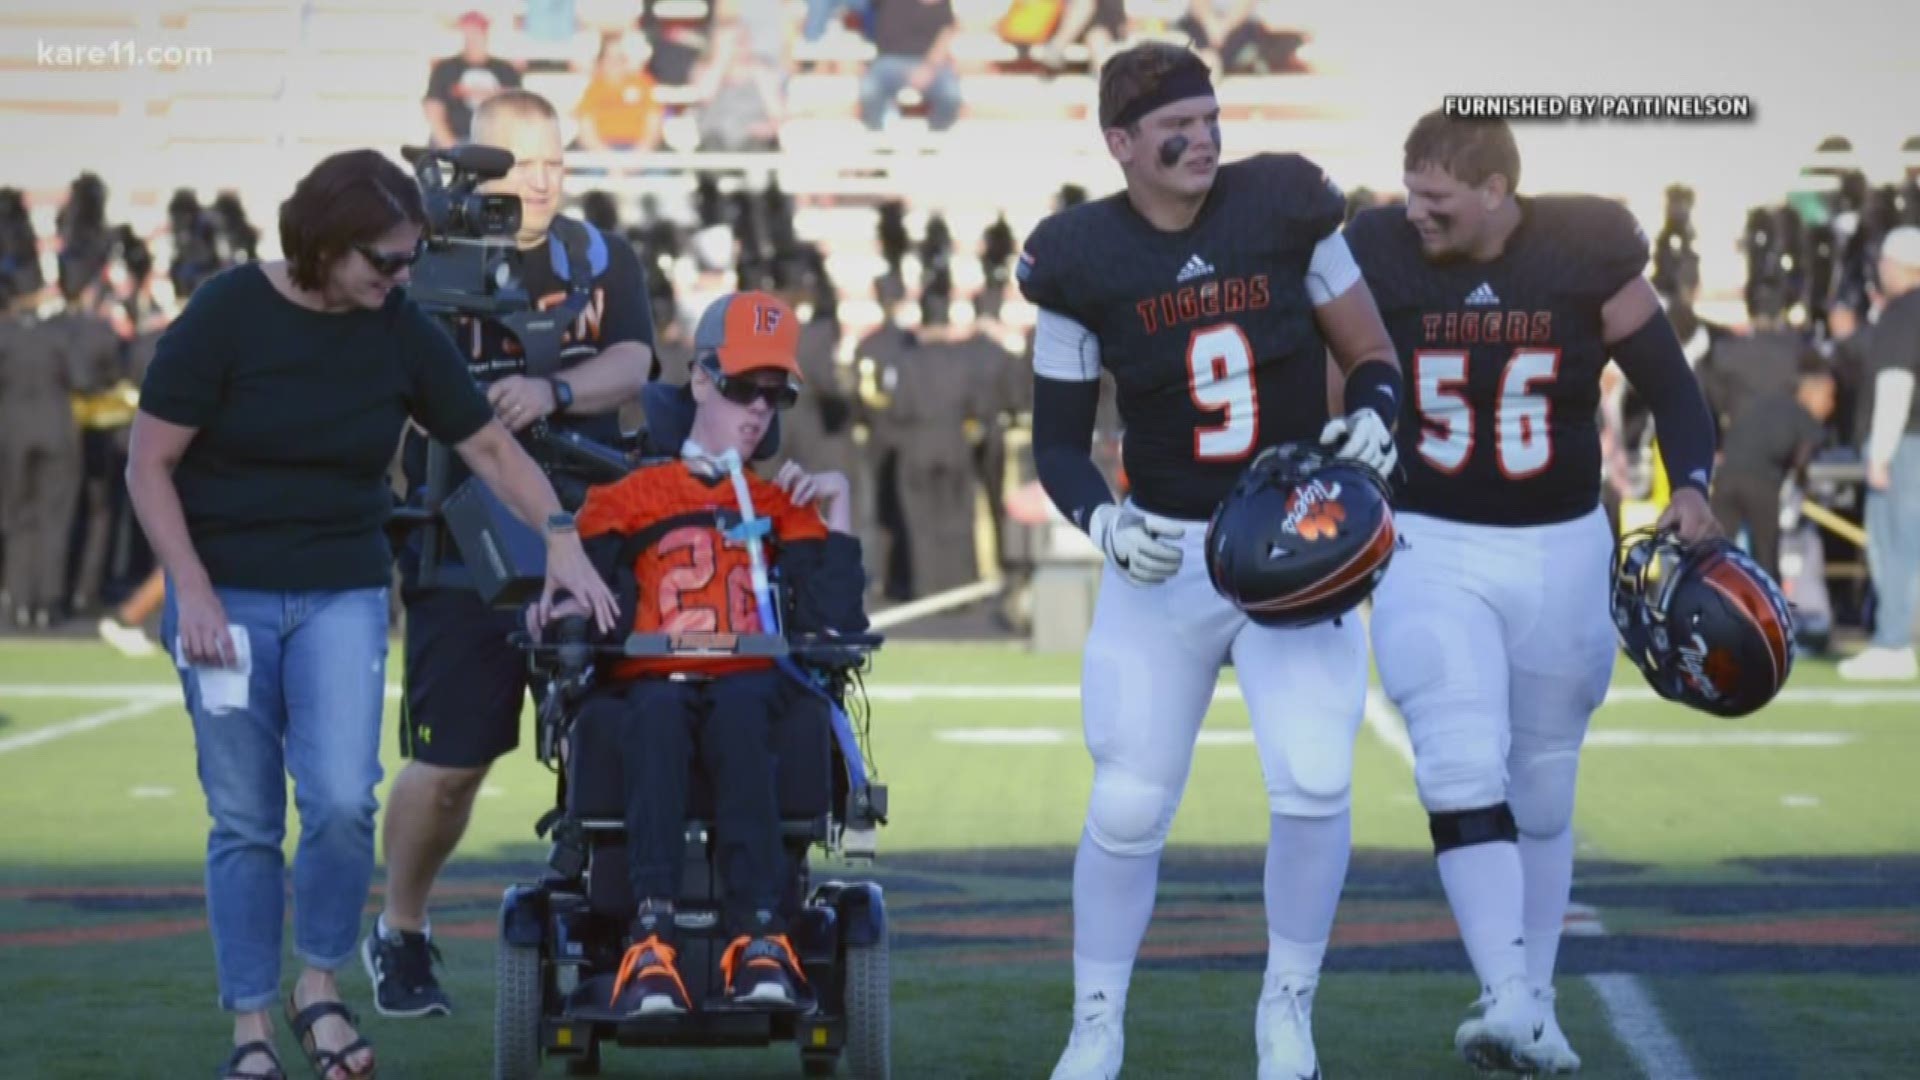 Andy Welter loves football, but has never played a down due to myotubular myopathy. Farmington HS Football made him feel like part of the team.